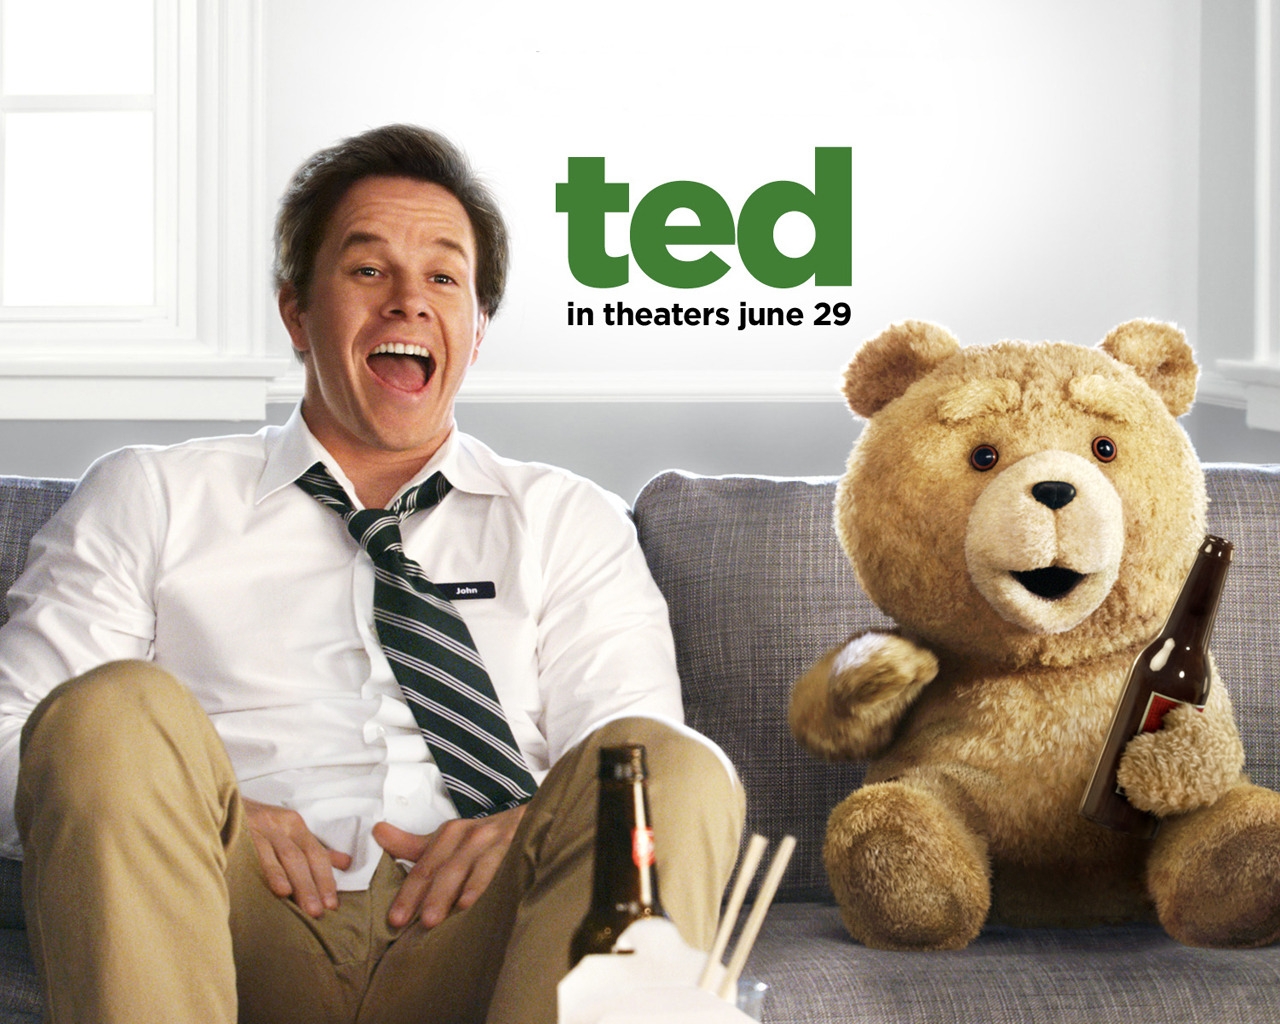 Ted The Movie for 1280 x 1024 resolution